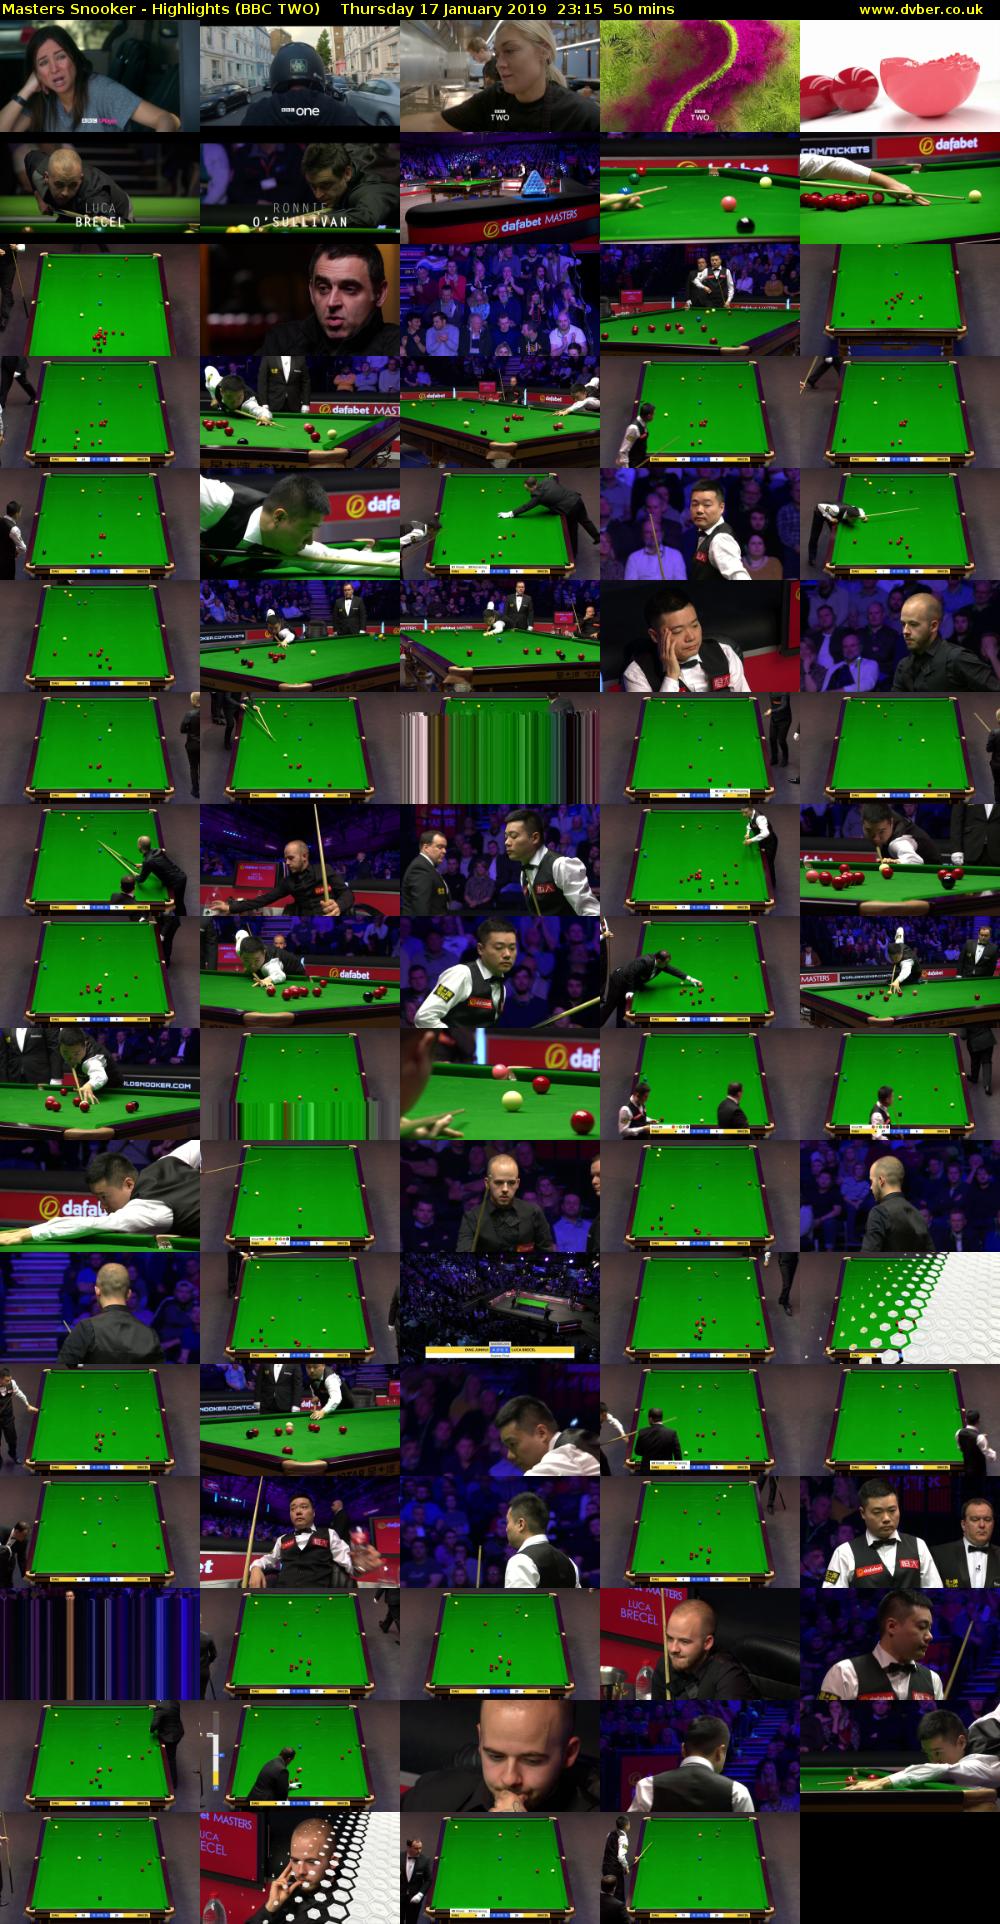 Masters Snooker - Highlights (BBC TWO) Thursday 17 January 2019 23:15 - 00:05